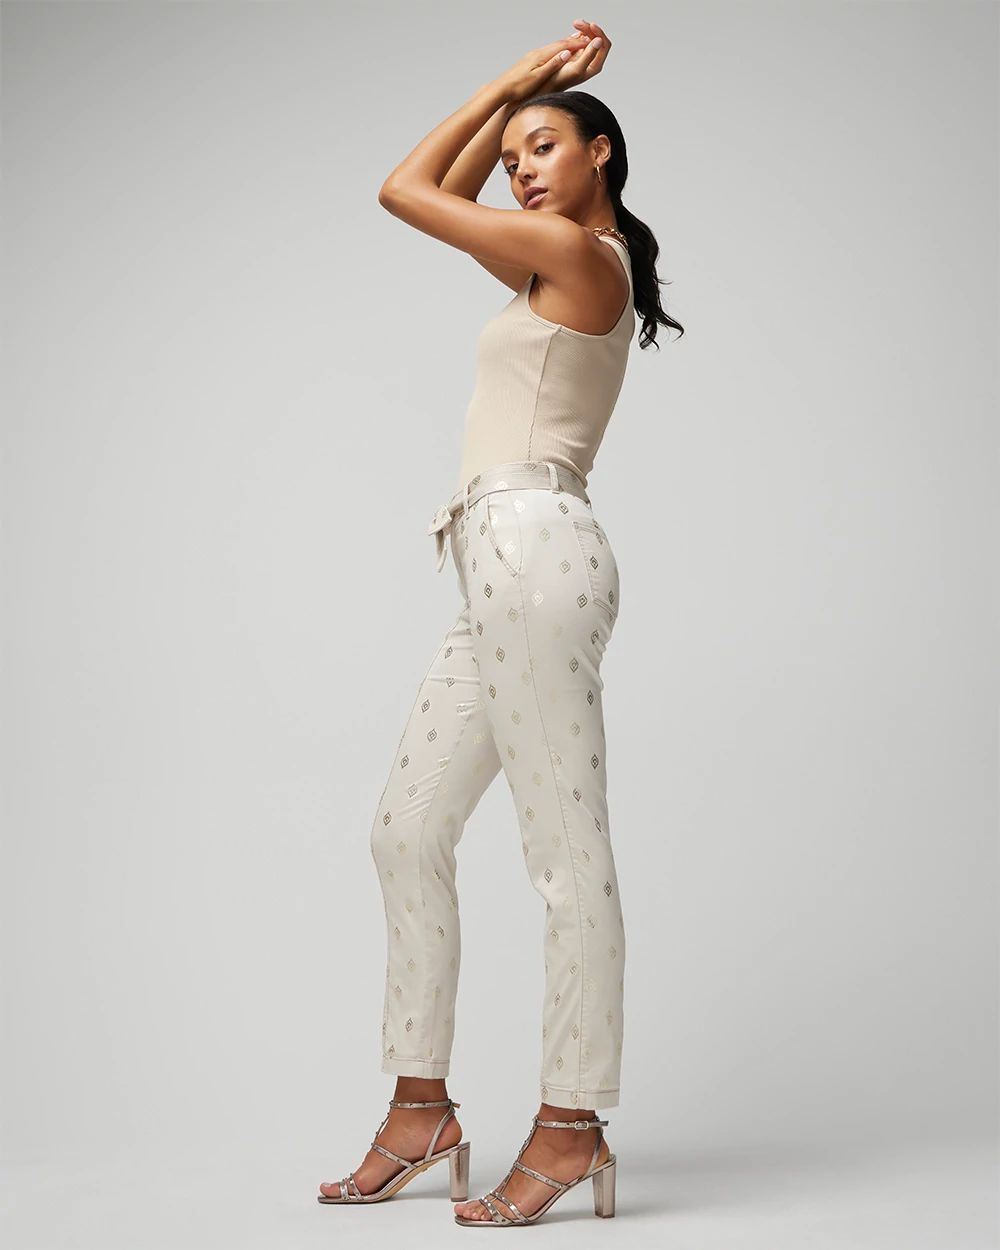 High Rise Foil Print Belted Pret Crop Jeans click to view larger image.